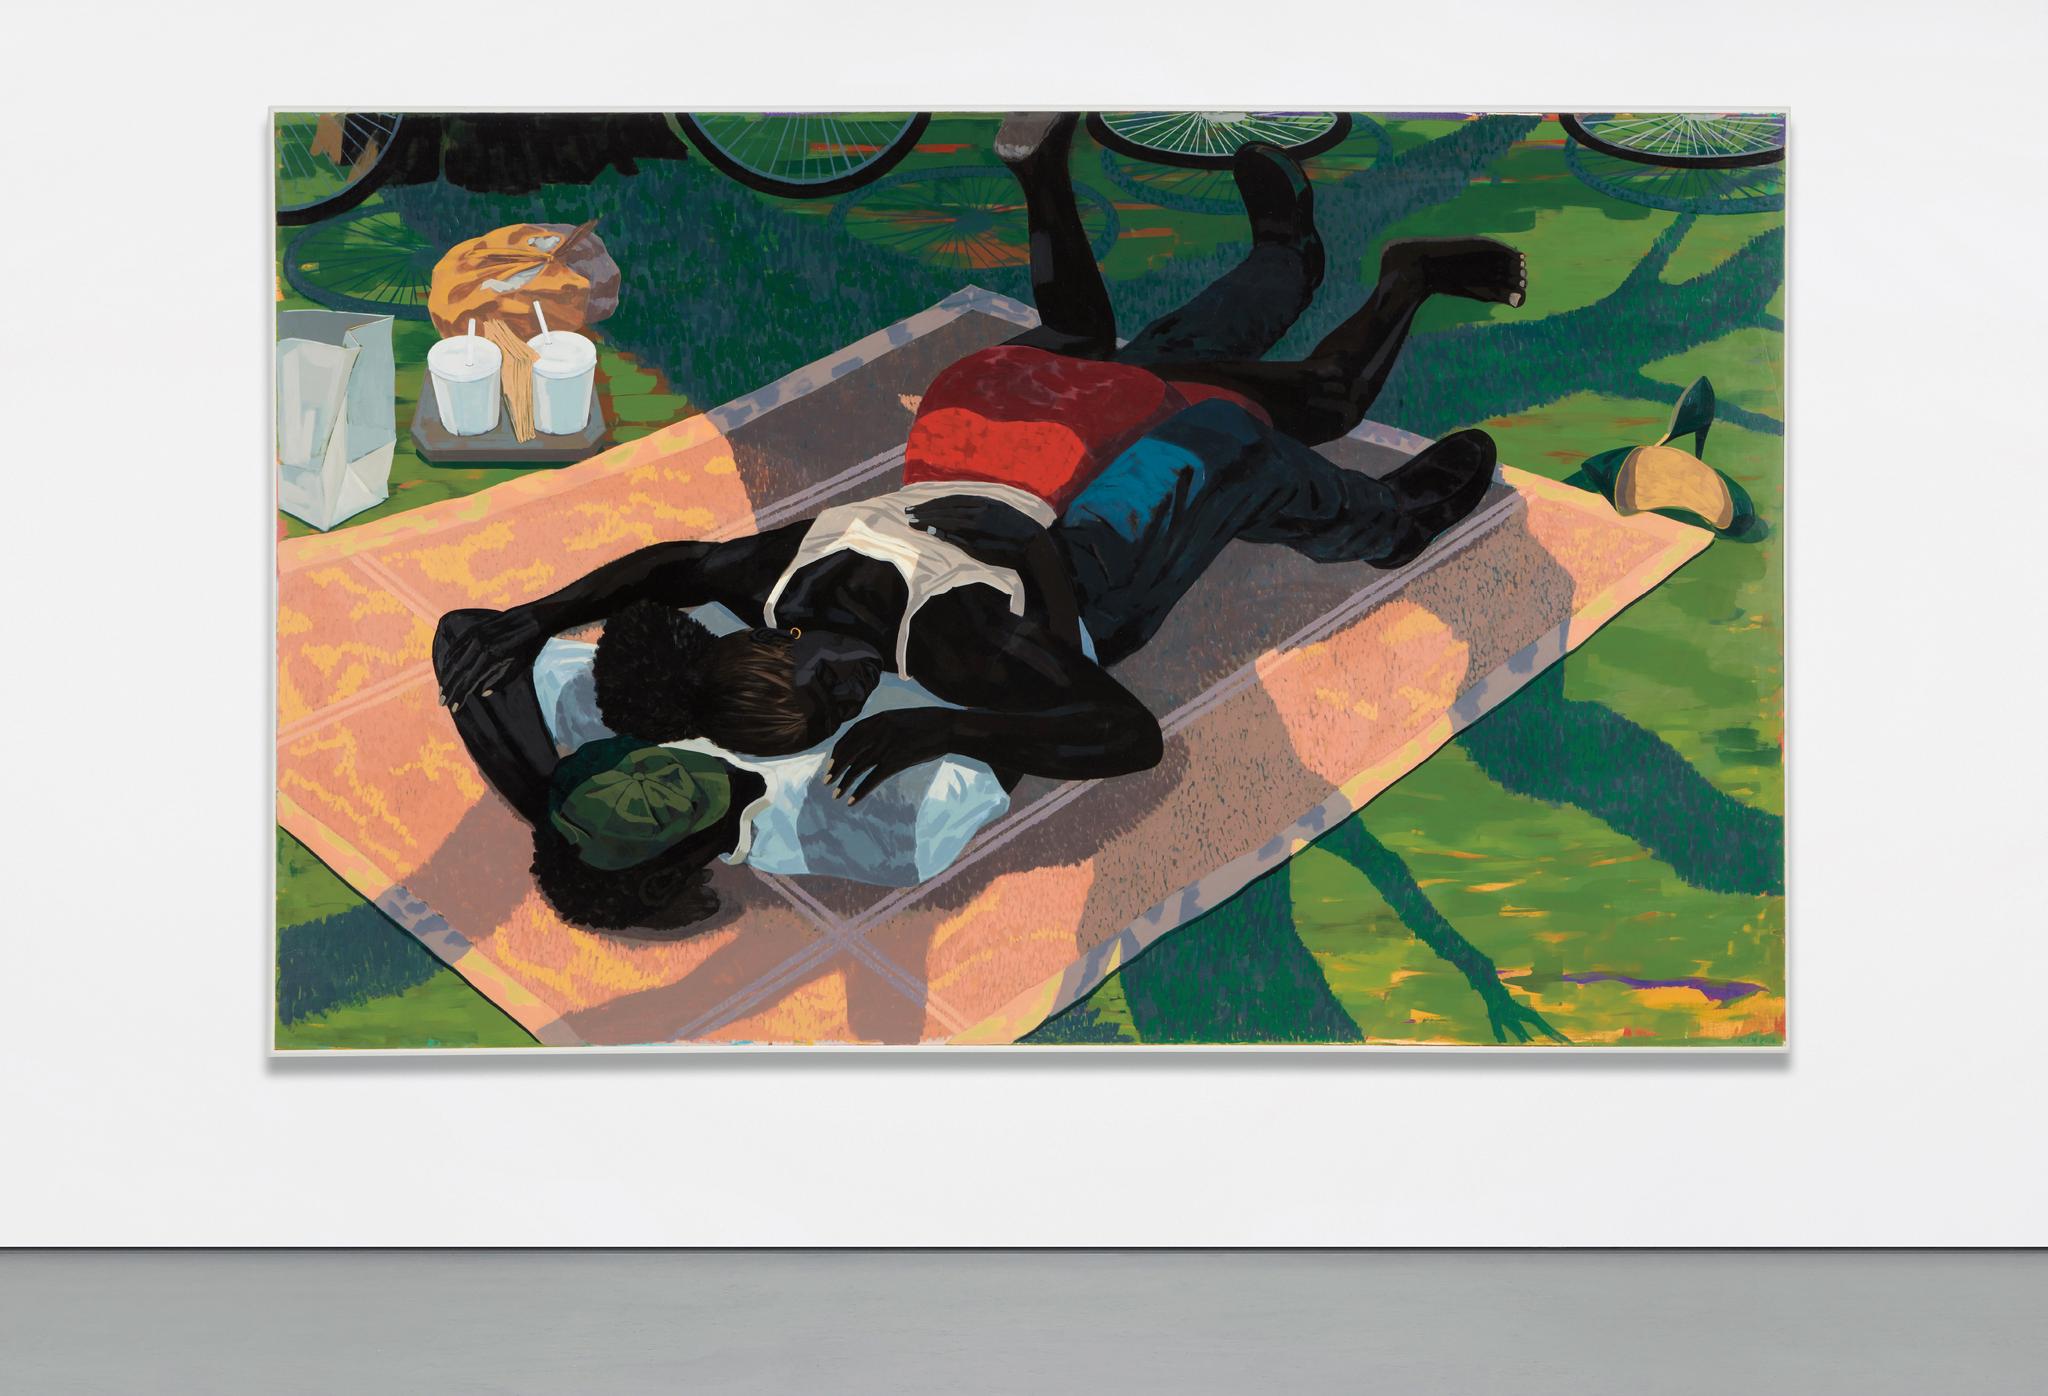 Untitled (Blanket Couple), Kerry James Marshall (2014). Courtesy of Fredriksen Family Collection